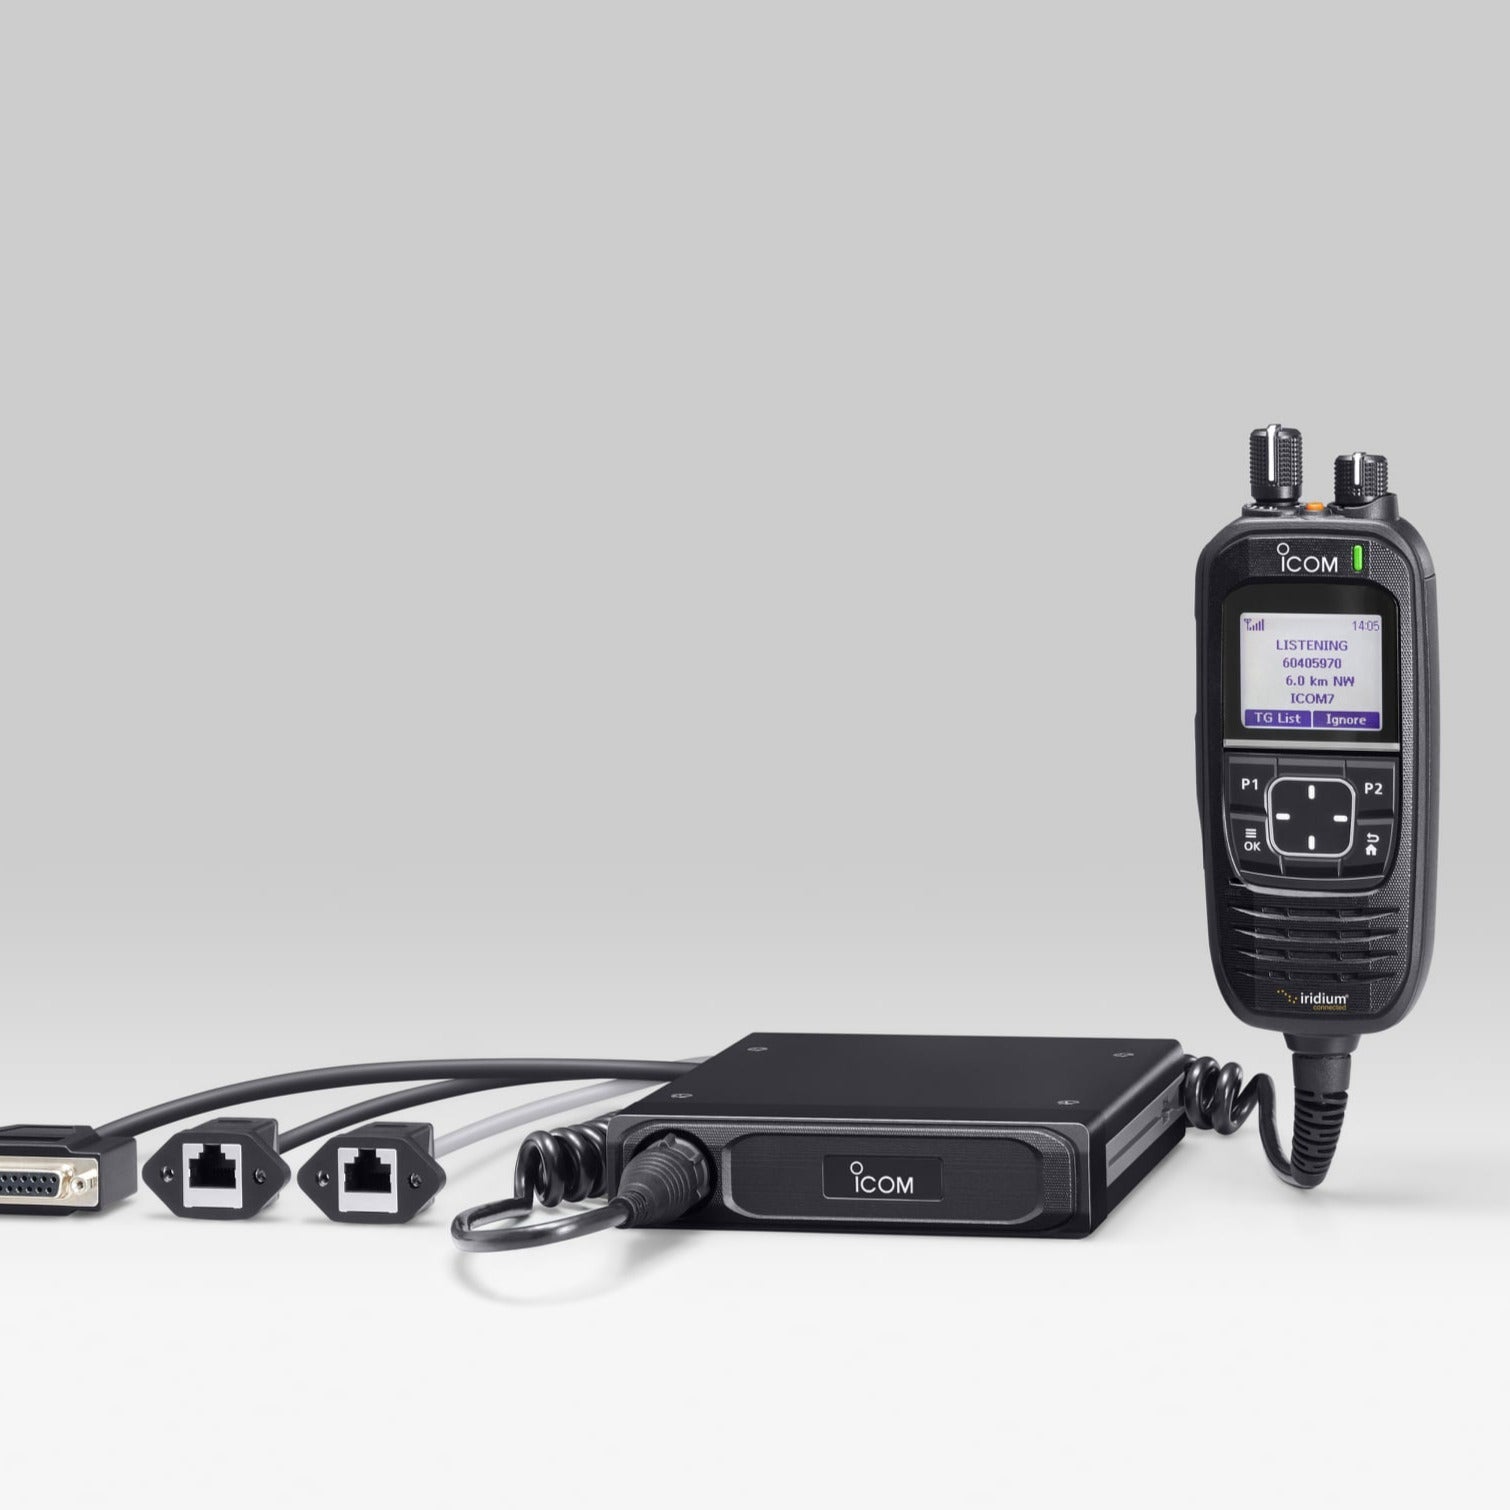 ICOM IC-SAT100 Satellite PTT Transceiver Hearing Protection and Comms ICOM Tactical Gear Supplier Tactical Distributors Australia